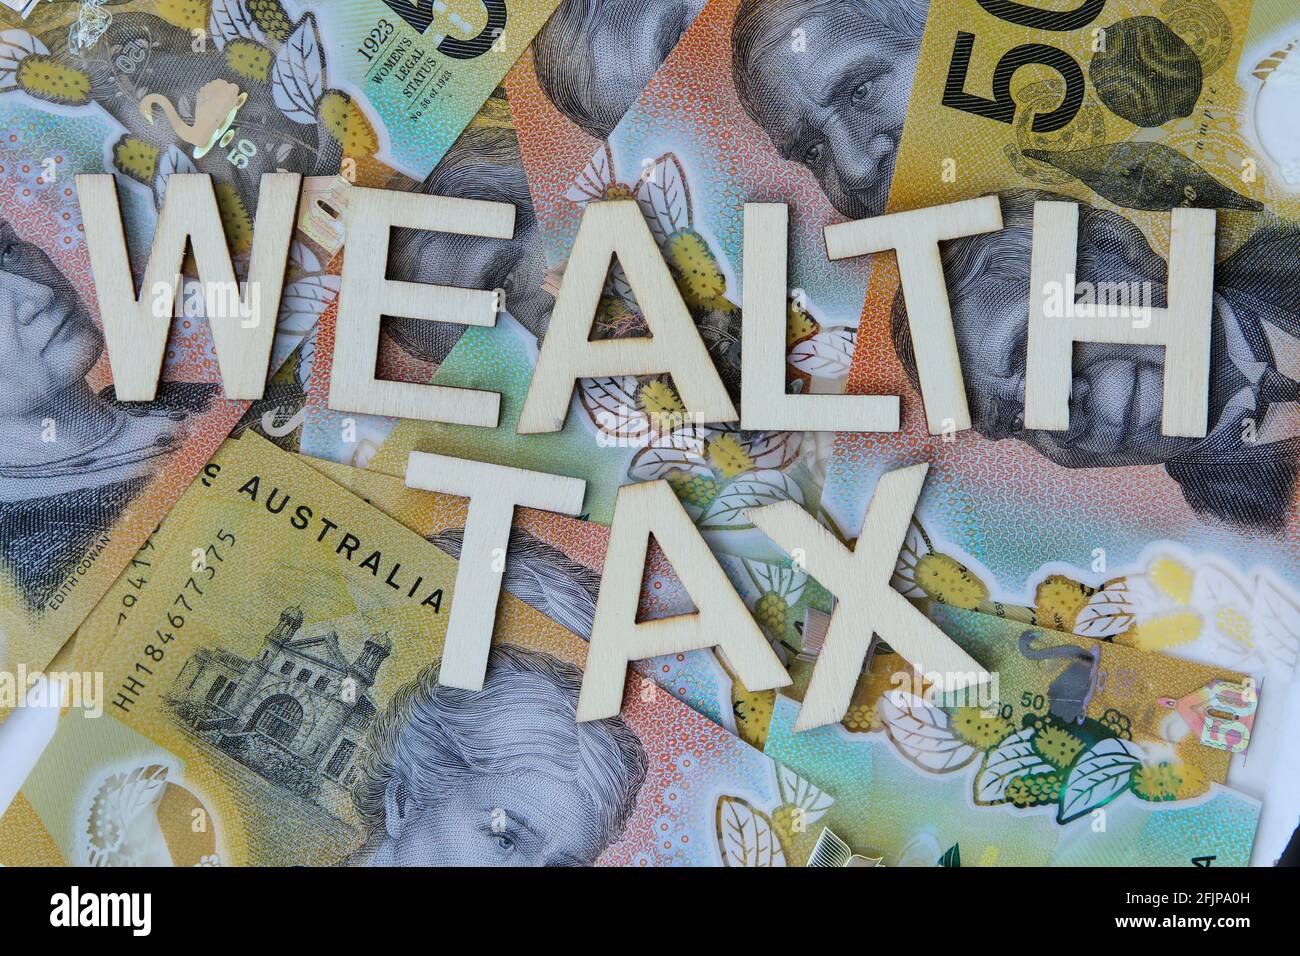 Wealth tax signage on a background of Australian dollars. Stock Photo